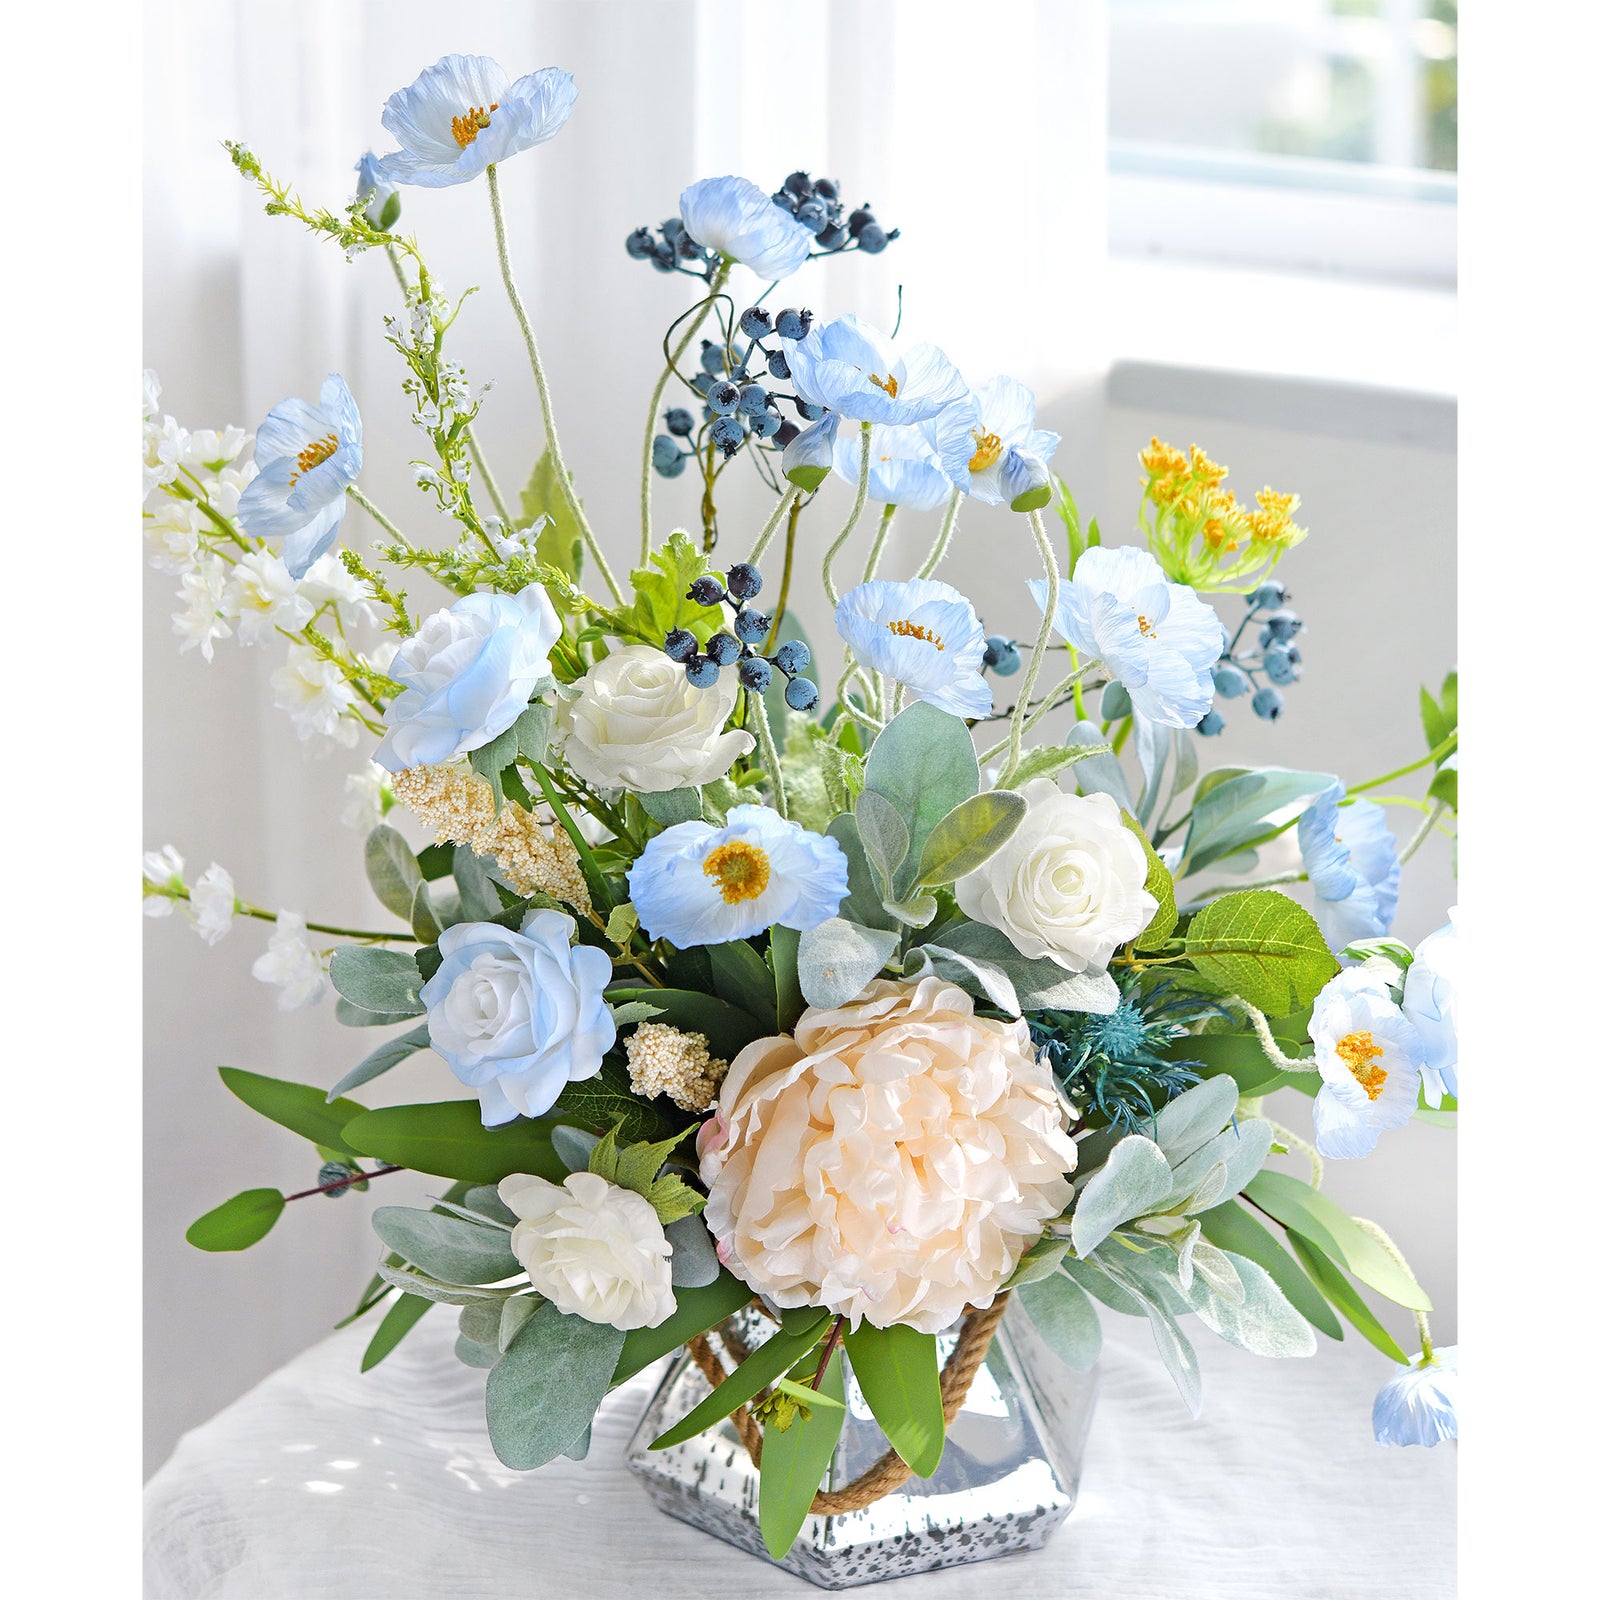 Antarctic Icy Blue Silk Poppies Artificial Flower Bouquet for Remembrance Home Wedding 6 Stems 23.6'' (60cm)